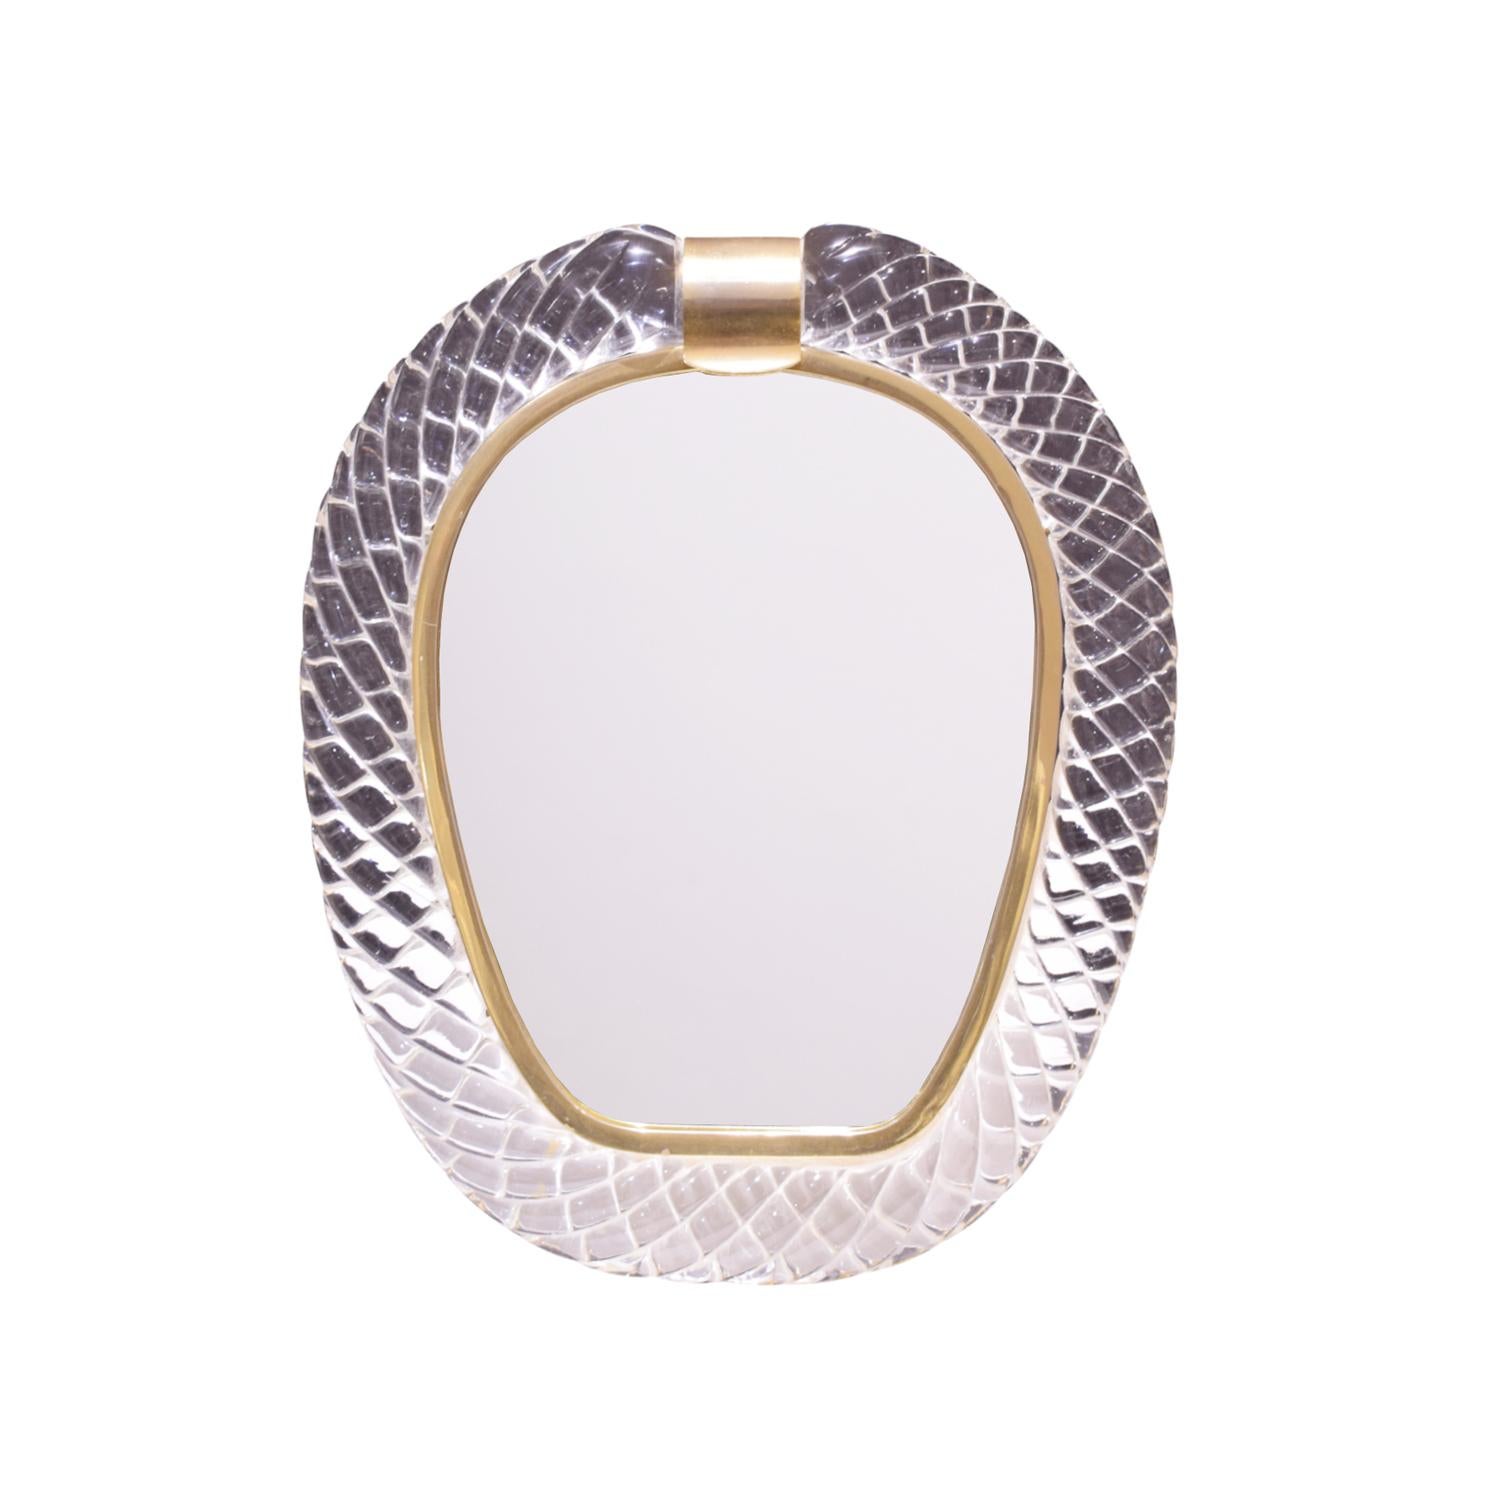 Large hand blown glass vanity mirror with brass accents by Seguso Vetri D’Arte, Murano Italy, 1981 (signed S.V.d ‘A Albarelli 981 on bottom). This mirror is exquisite and beautifully made.